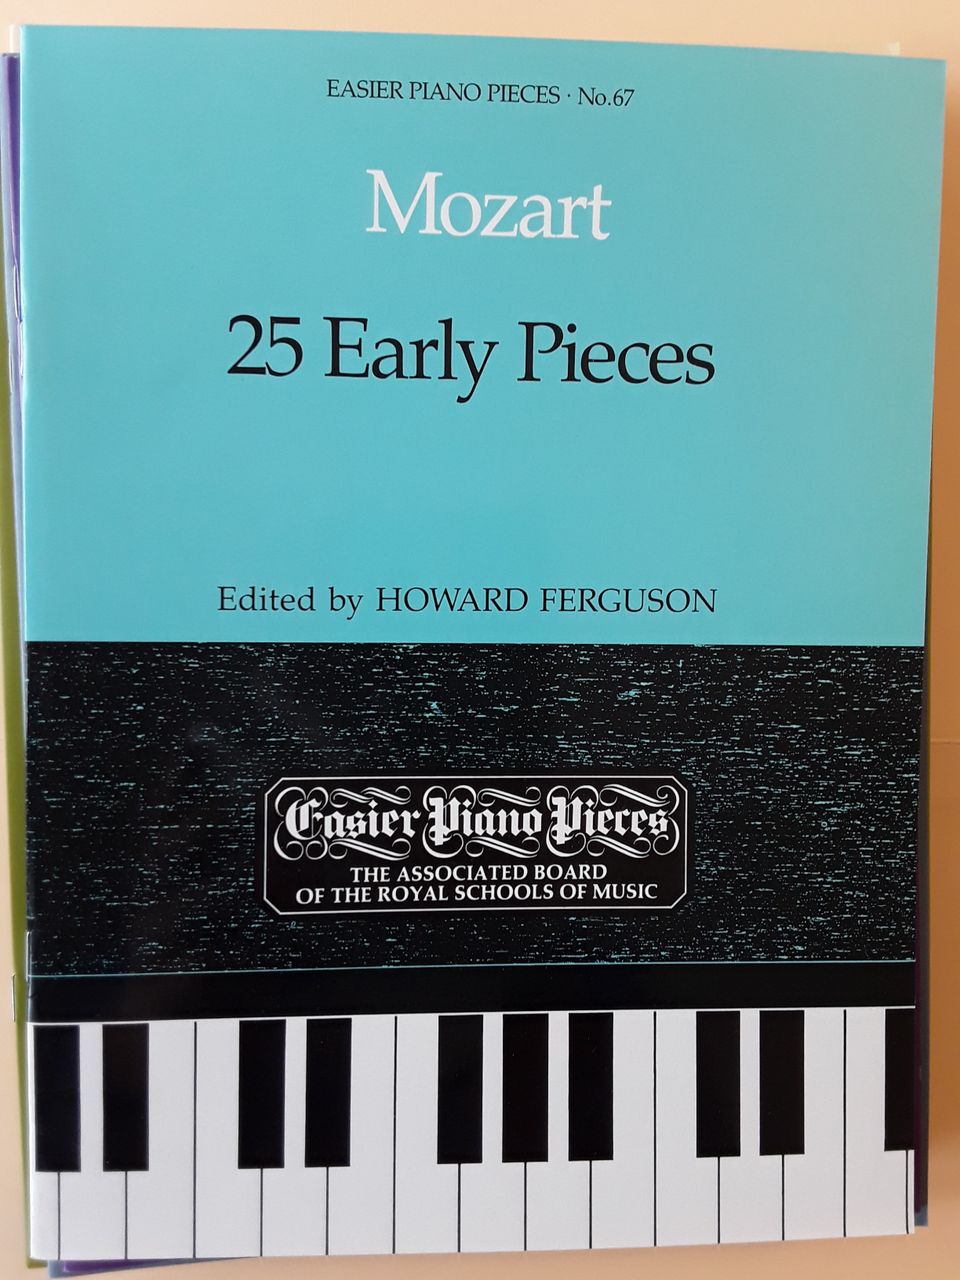 Nuotti: Mozart: 25 Early Pieces, piano